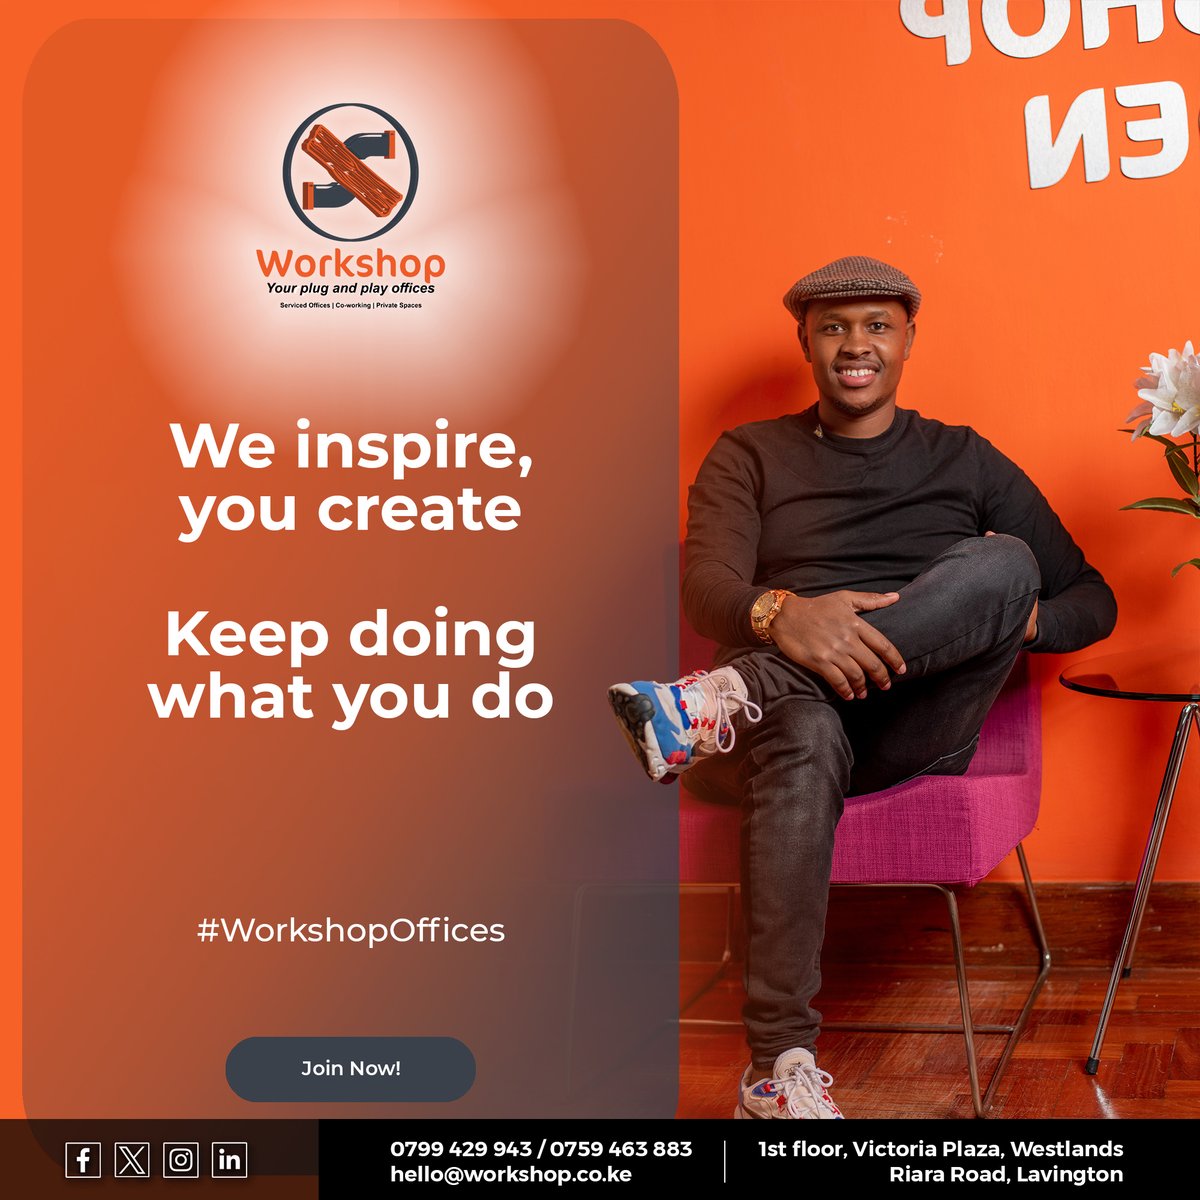 From innovative startups to thriving   businesses, your contributions make our community vibrant and dynamic.

+254 799429943-   Workshop Riara
+254 759 463 883- Workshop Westlands
#CoworkingSpace #OfficeSpace #SharedOffices #MeetingRooms #FurnishedOffice  #VirtualOffice #DayPass